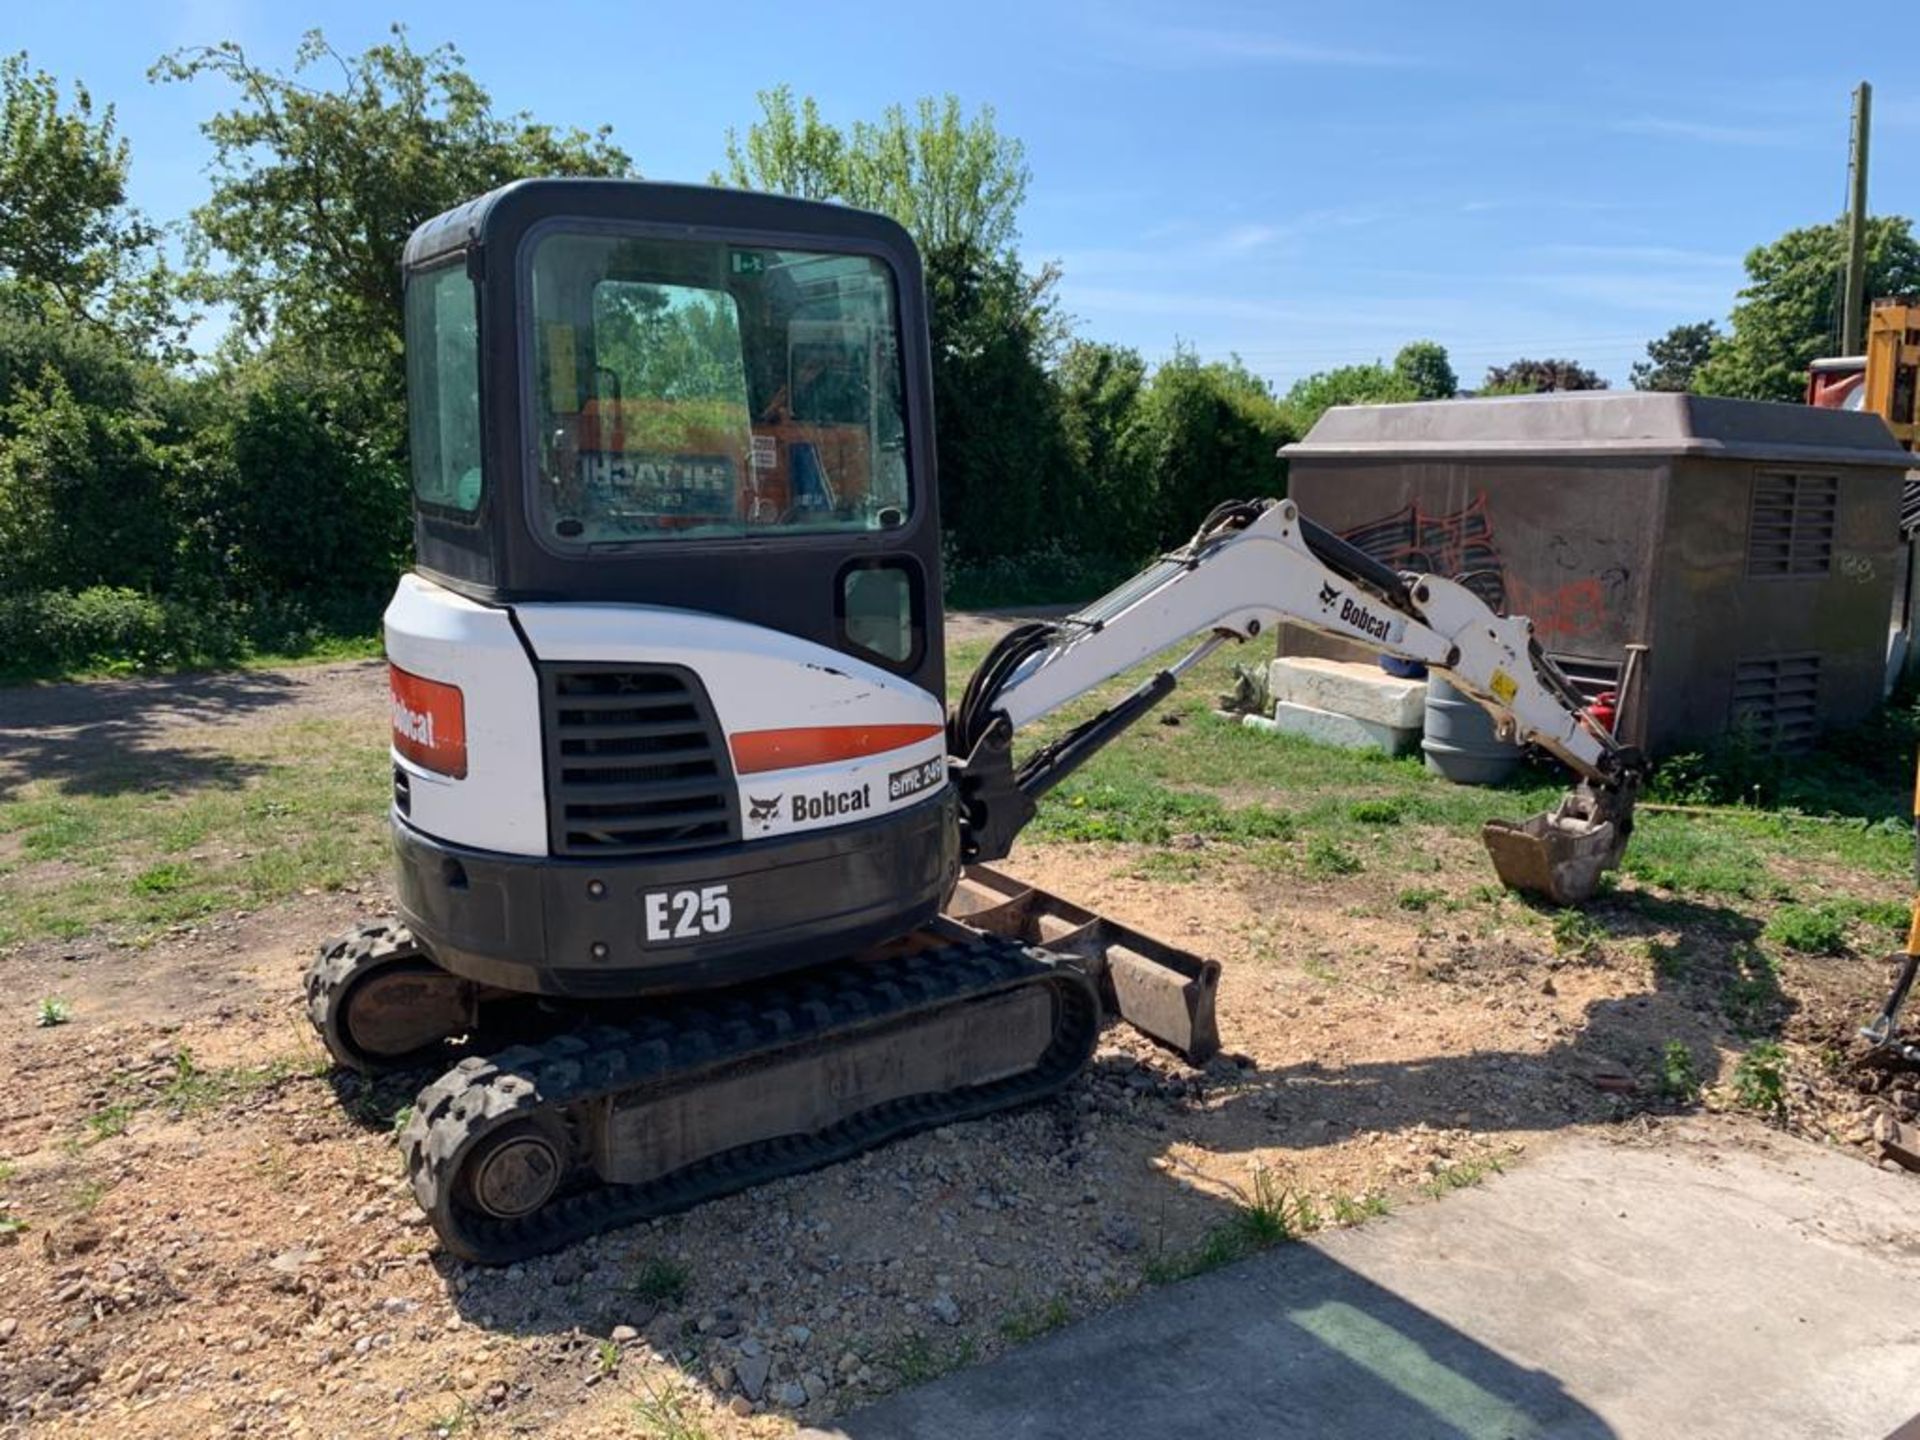 BOBCAT E25 RUBBER TRACKED COMPACT EXCAVATOR / DIGGER, YEAR 2014, 15.3 KW, MASS 2516 KG *PLUS VAT*